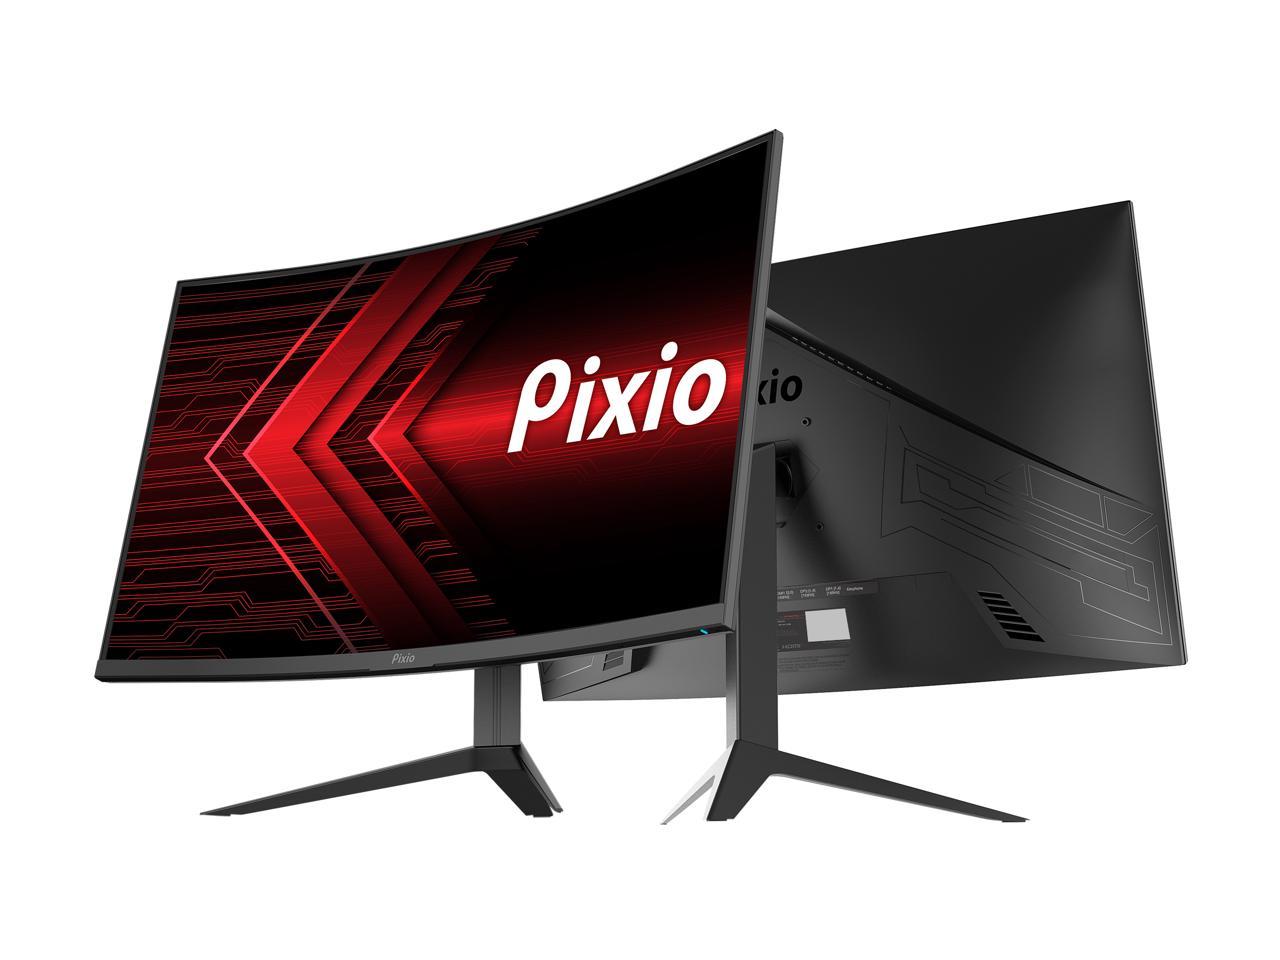 Pixio PXC325 32 inch 165Hz FHD 1920 x 1080p DCI P3 97% 165Hz 1ms FreeSync HDR 32 inch 1500R Curved Gaming Monitor $229.99